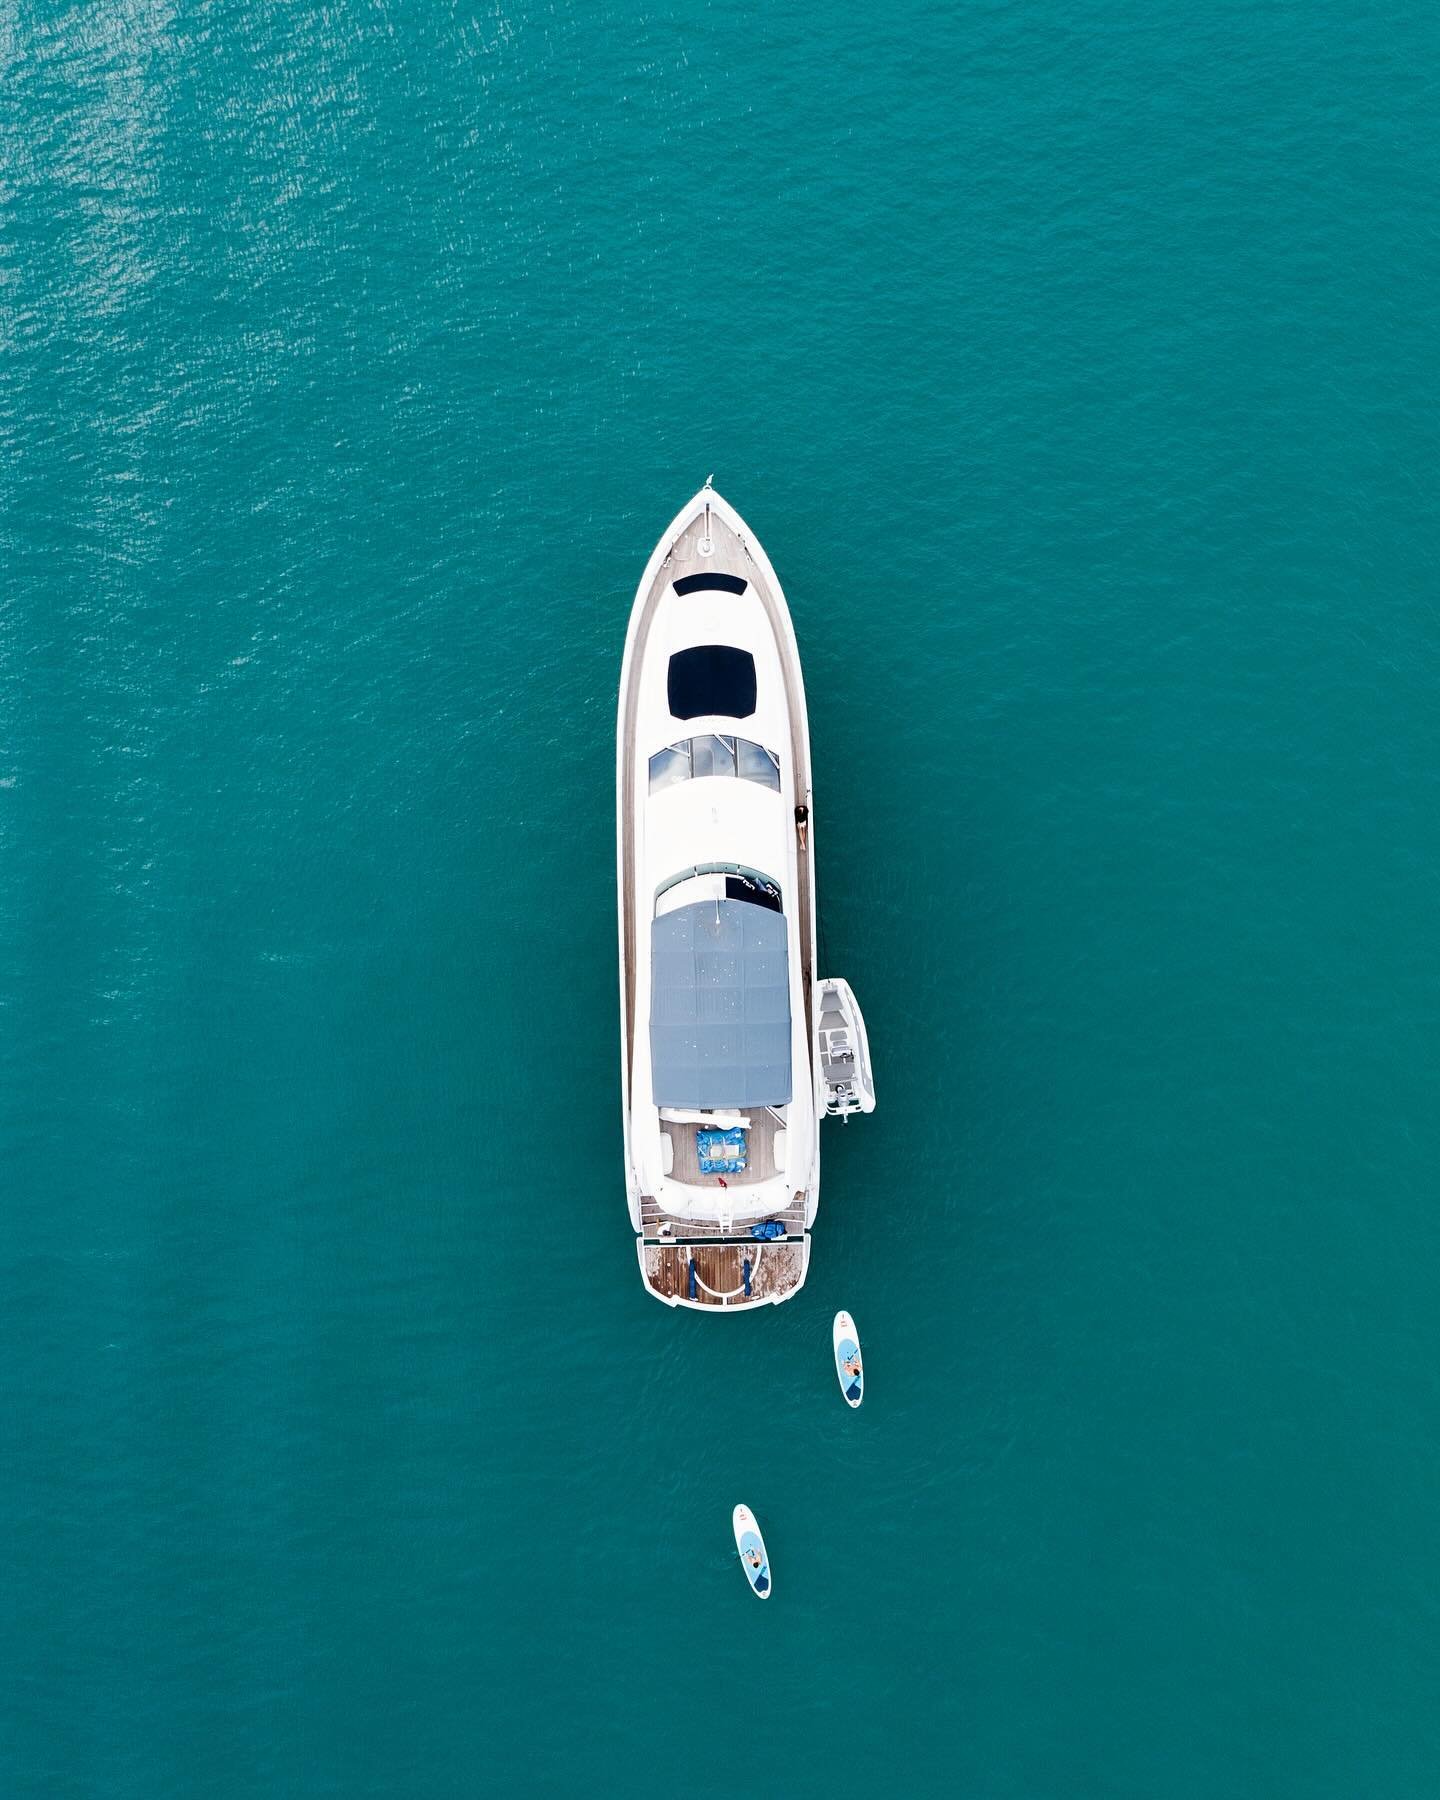 Sail into the white-sand and crystal-clear waters of the Whitsundays with an expert crew while enjoying the unmatched comfort and luxury of the 82ft luxurious Sunseeker, M/Y Alani.

With a private chef and attentive crew, every aspect of your journey